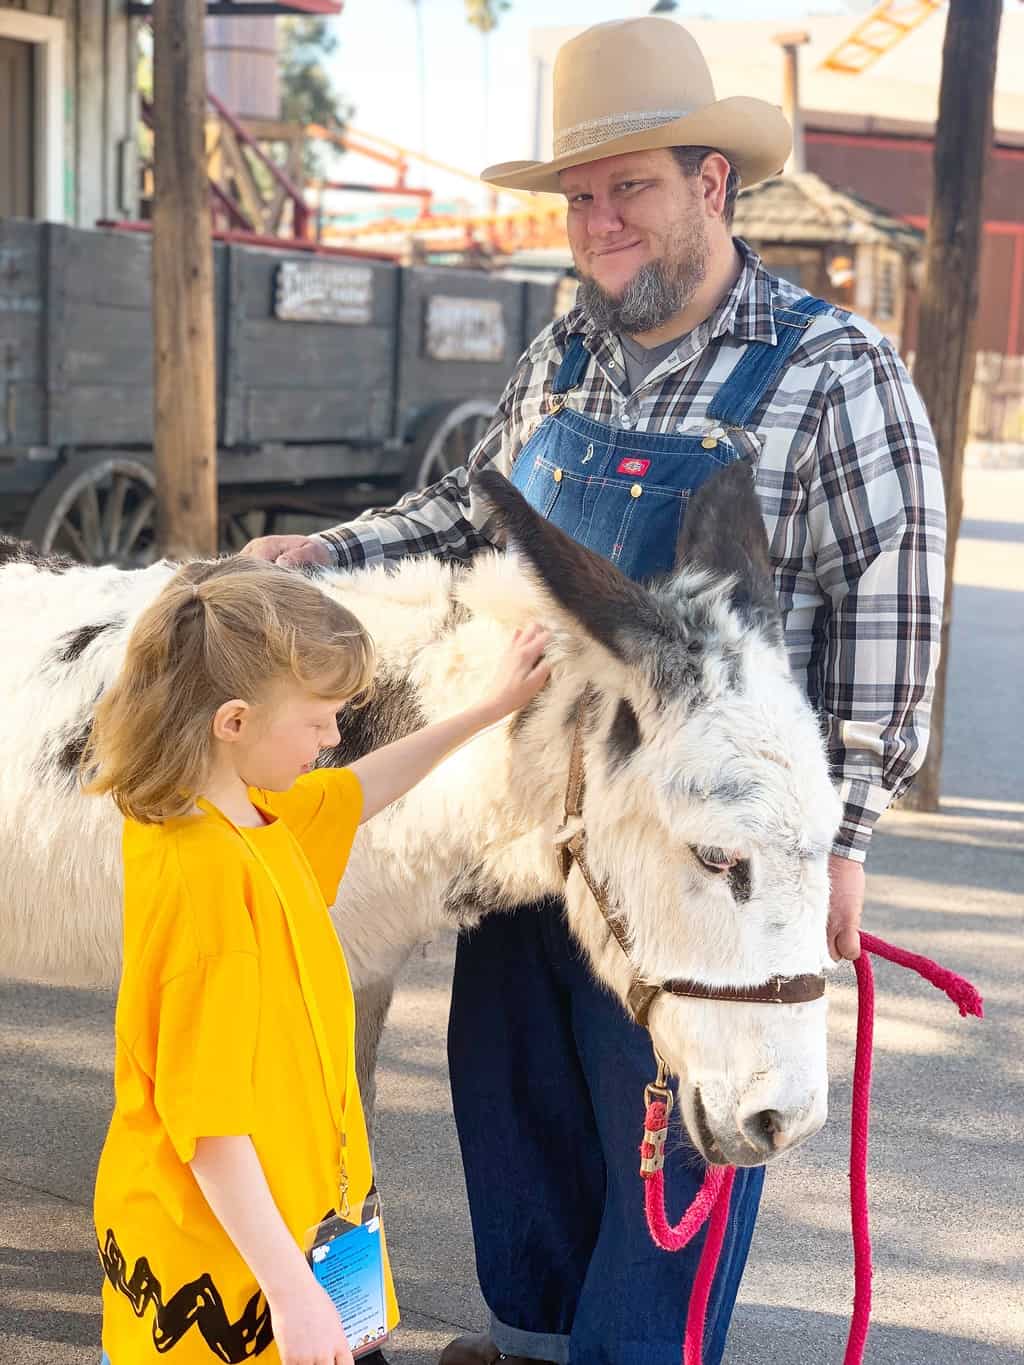 Are you a Snoopy fan? Attend the annual Knott's Berry Farm Peanuts Celebration every winter in Buena Park, California! From Snoopy inspired treats to live entertainment to meeting Pig Pen in the Livery Stable, there is something for every Snoopy fan.